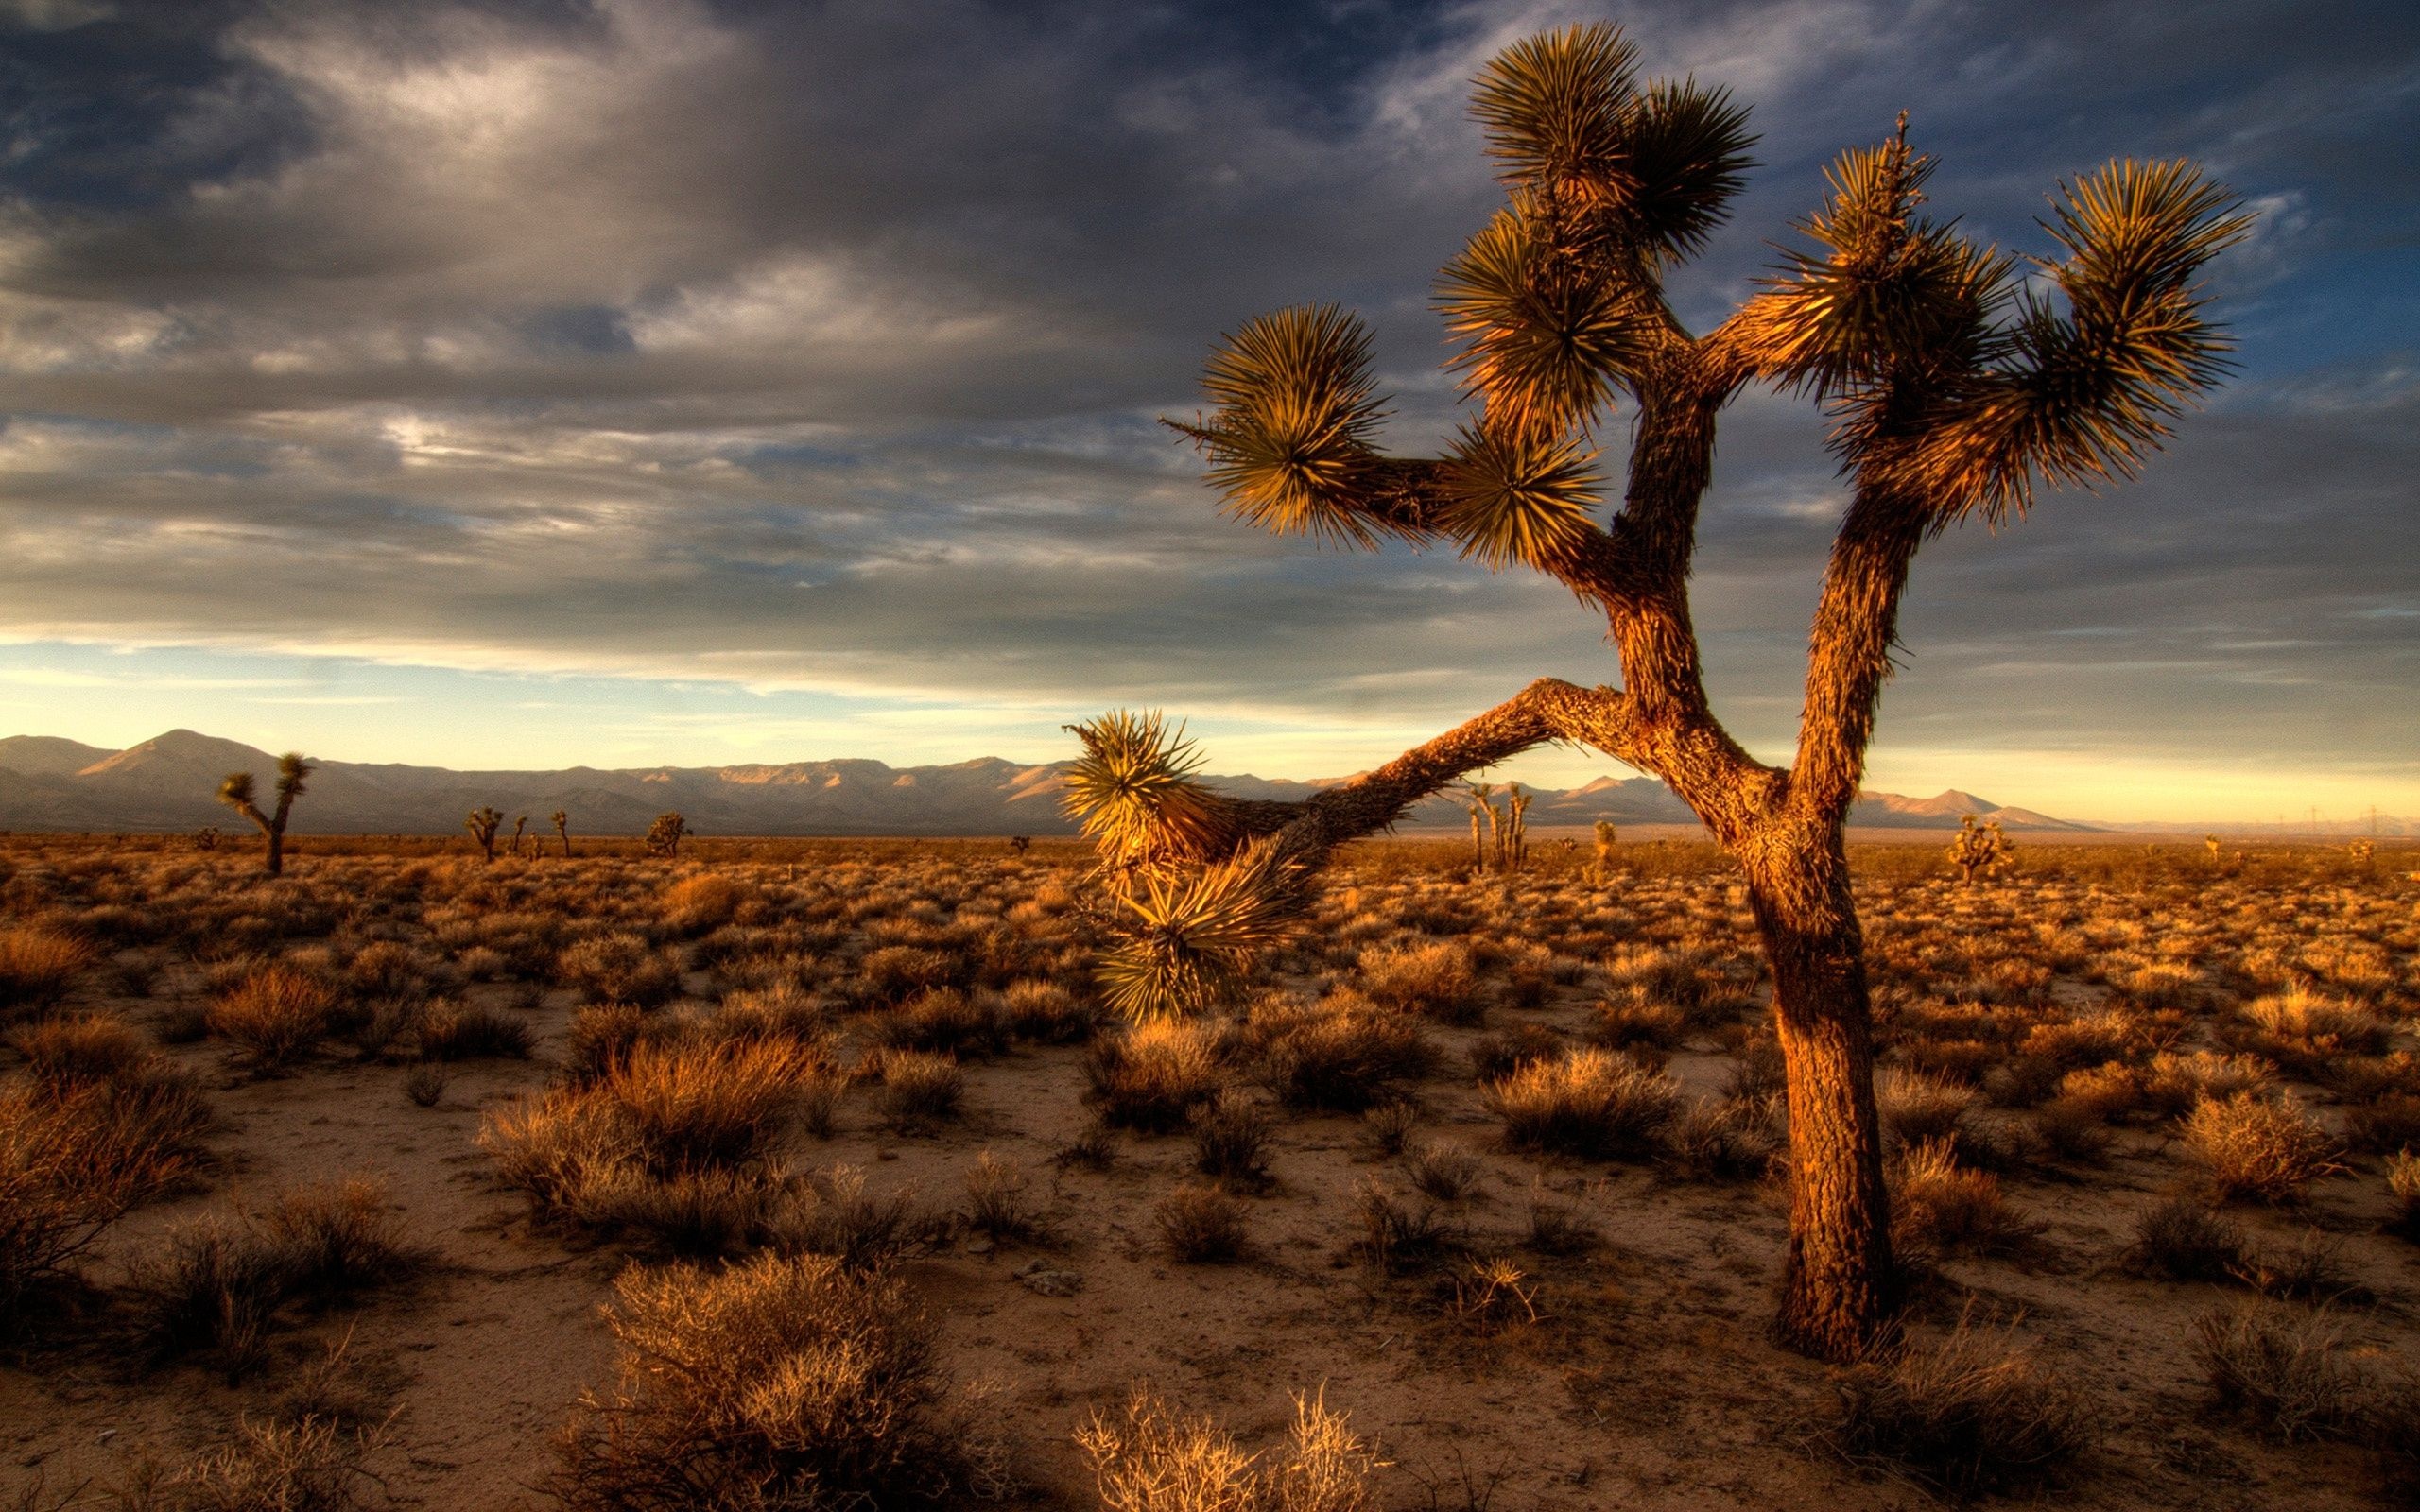 Joshua Tree National Park, HD wallpapers, Free images, Picturesque backgrounds, 2560x1600 HD Desktop